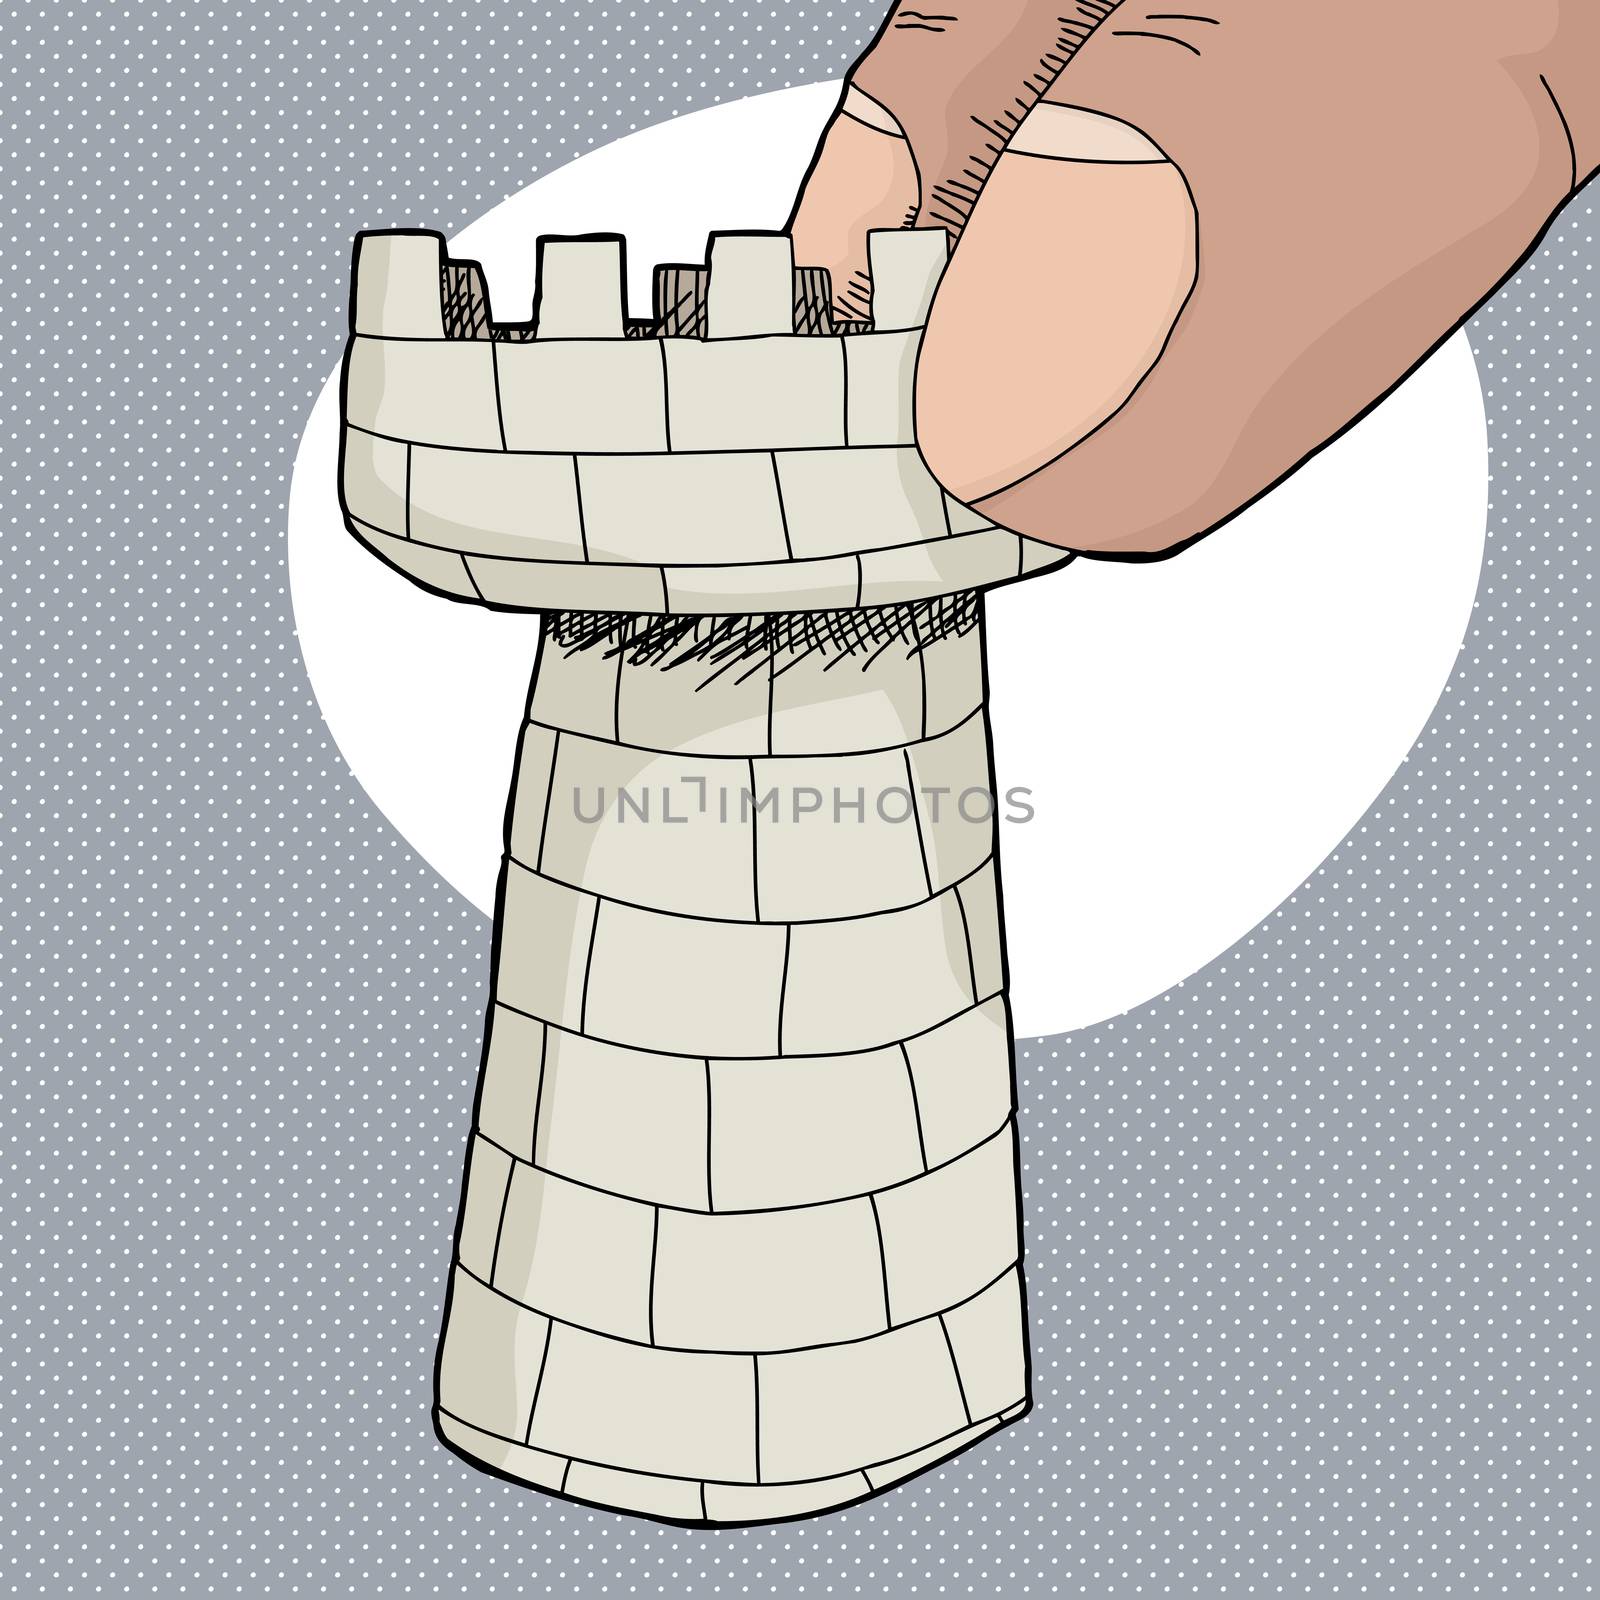 Fingers holding chess rook piece over halftone background